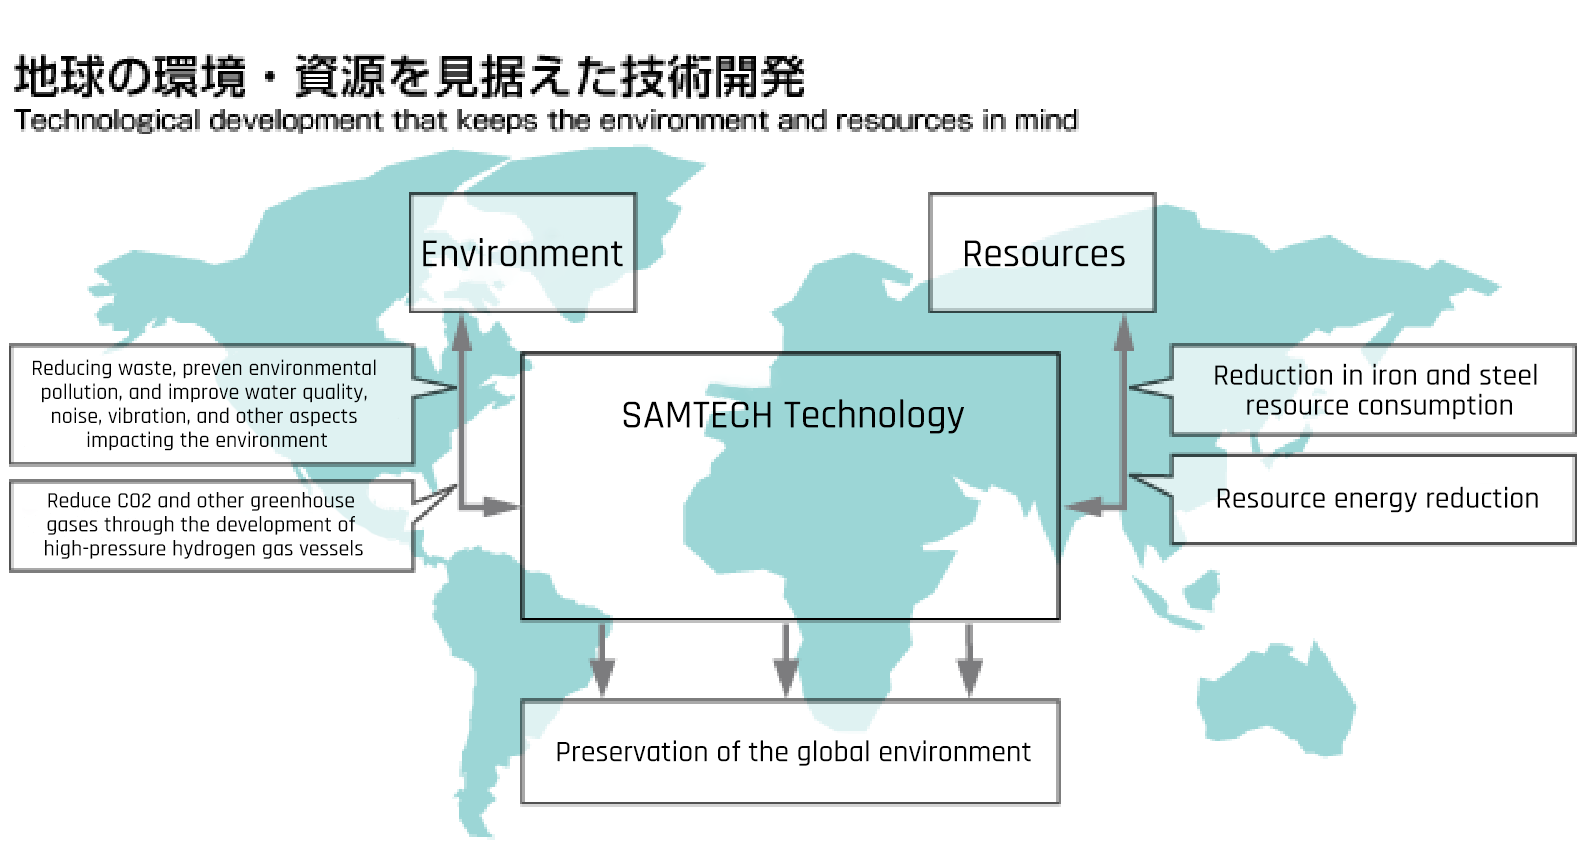 Technological development that keeps the environment and resources in mind